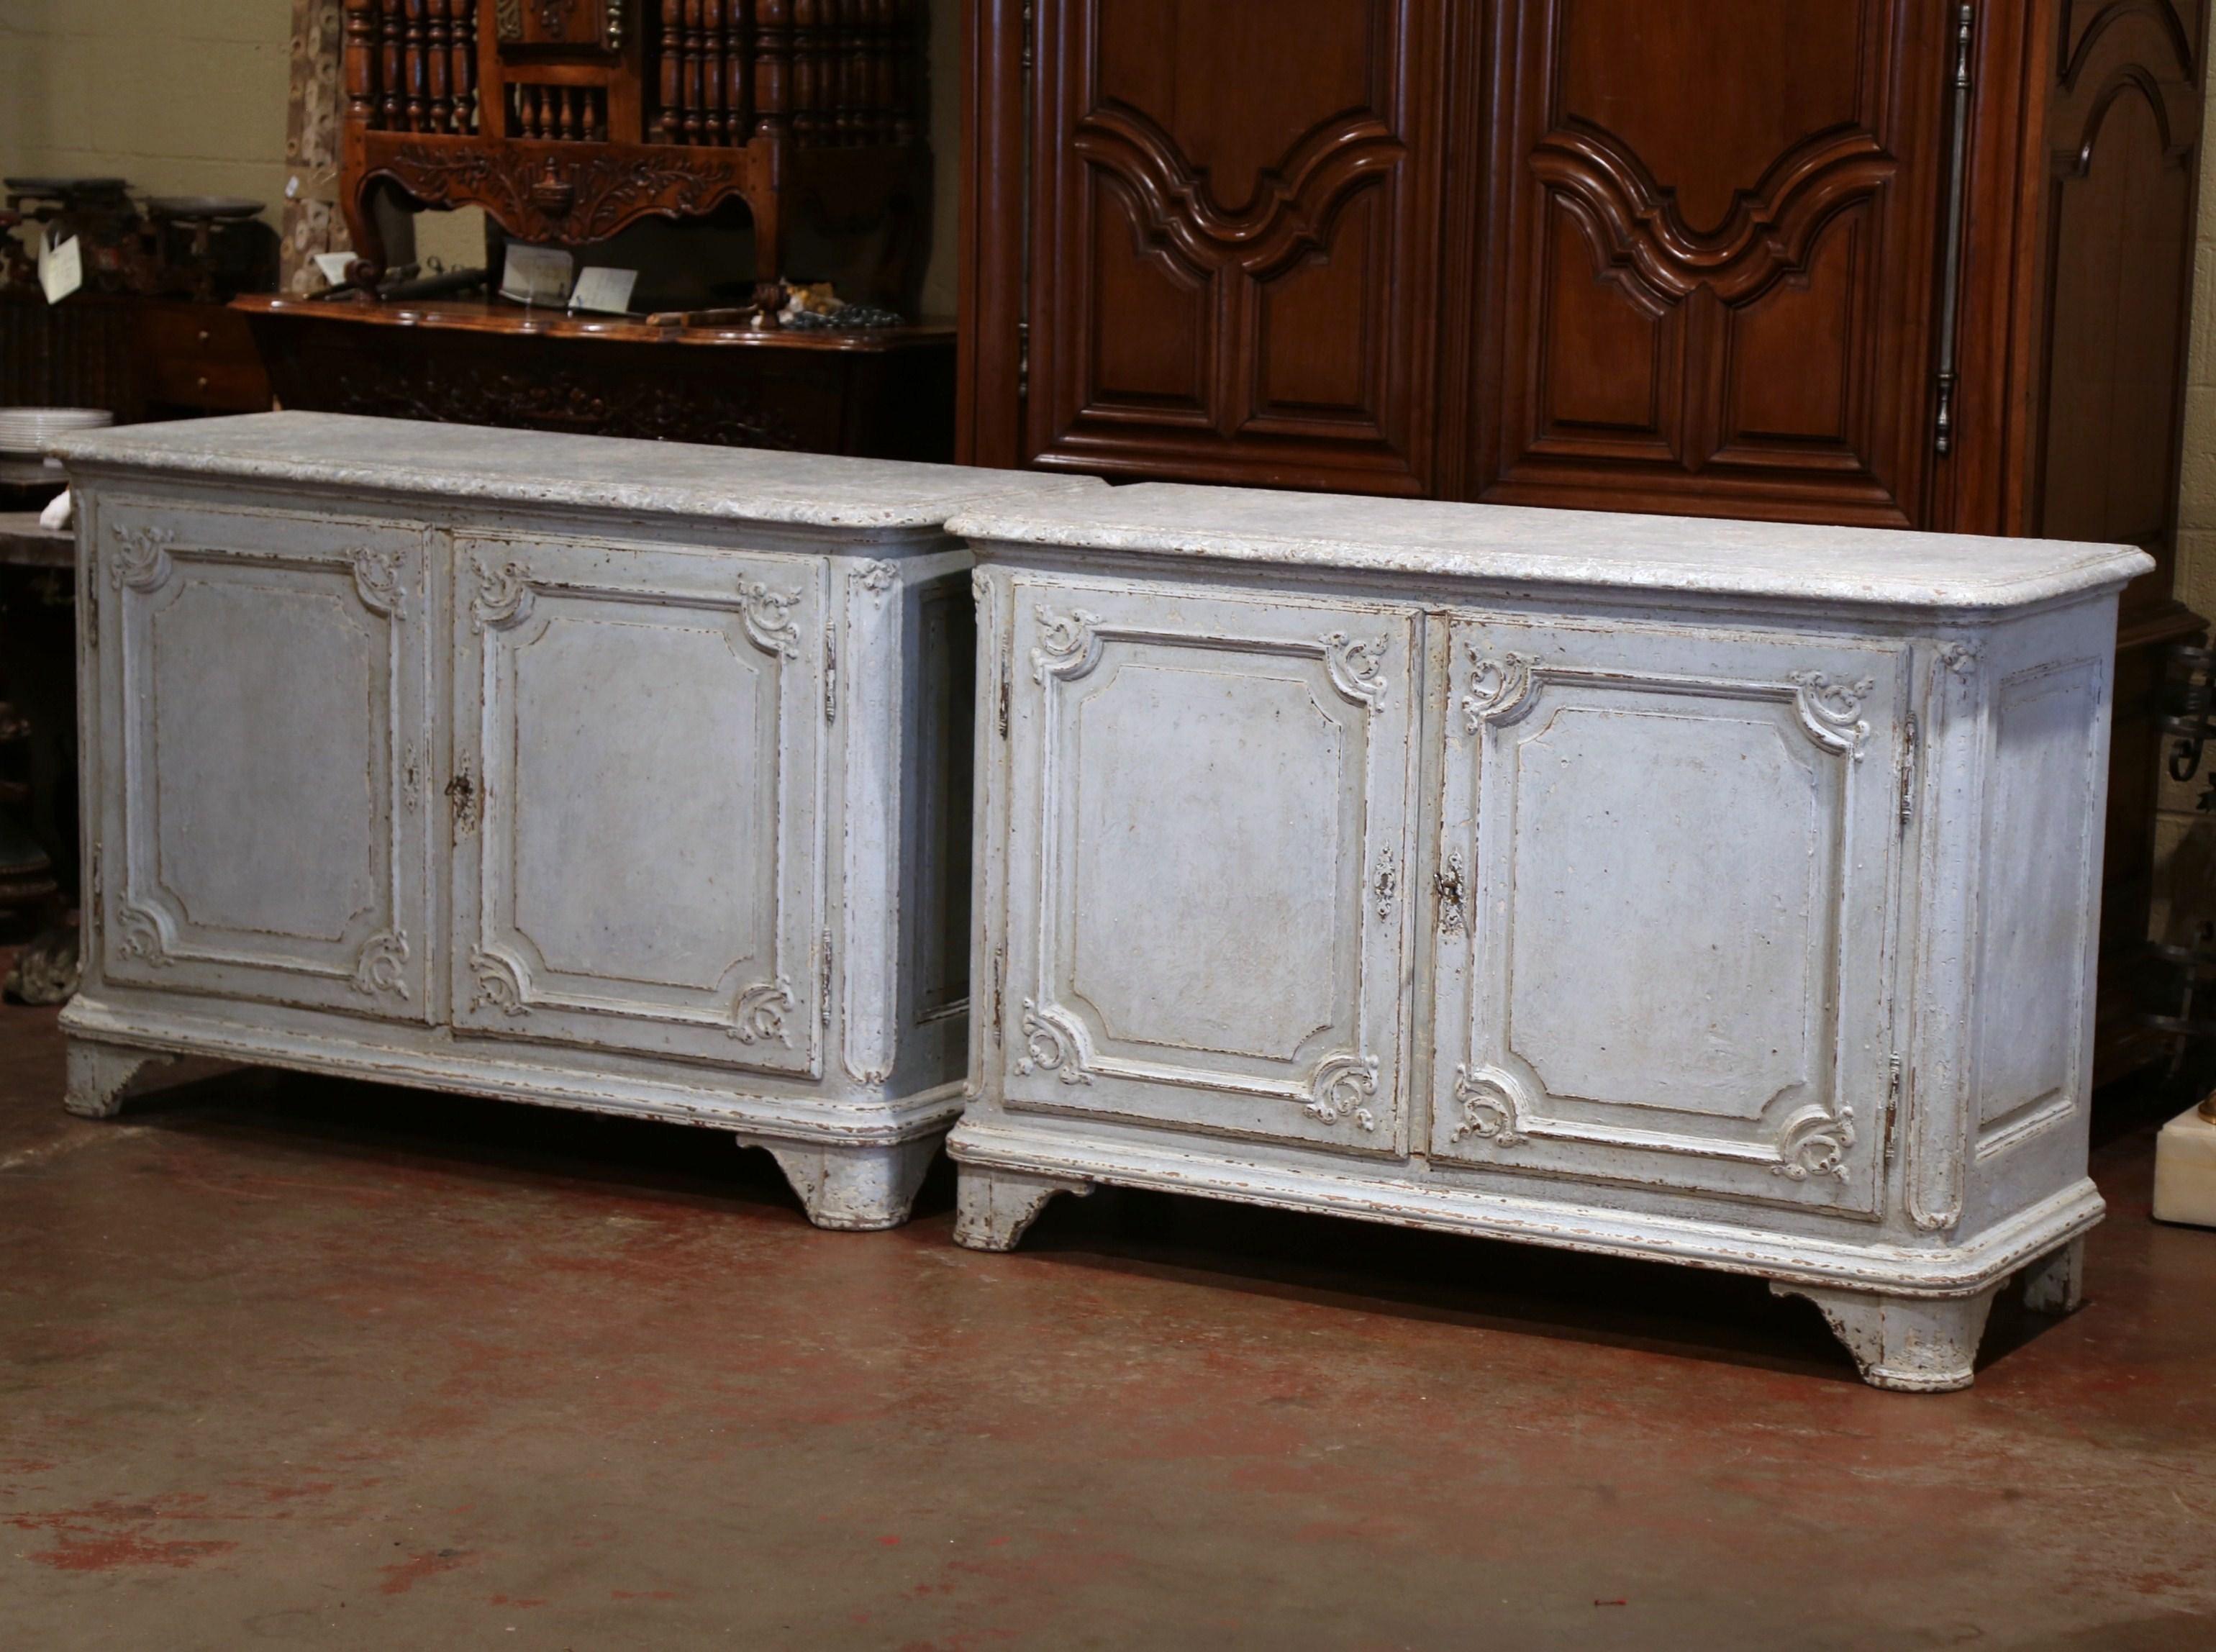 Crafted in Paris France, circa 1860, both cabinets with bowed front Stand on curved feet under a straight decorative plinth; each buffet with bombe facade, features two front doors with raised panels and carved floral motifs in all corners, and